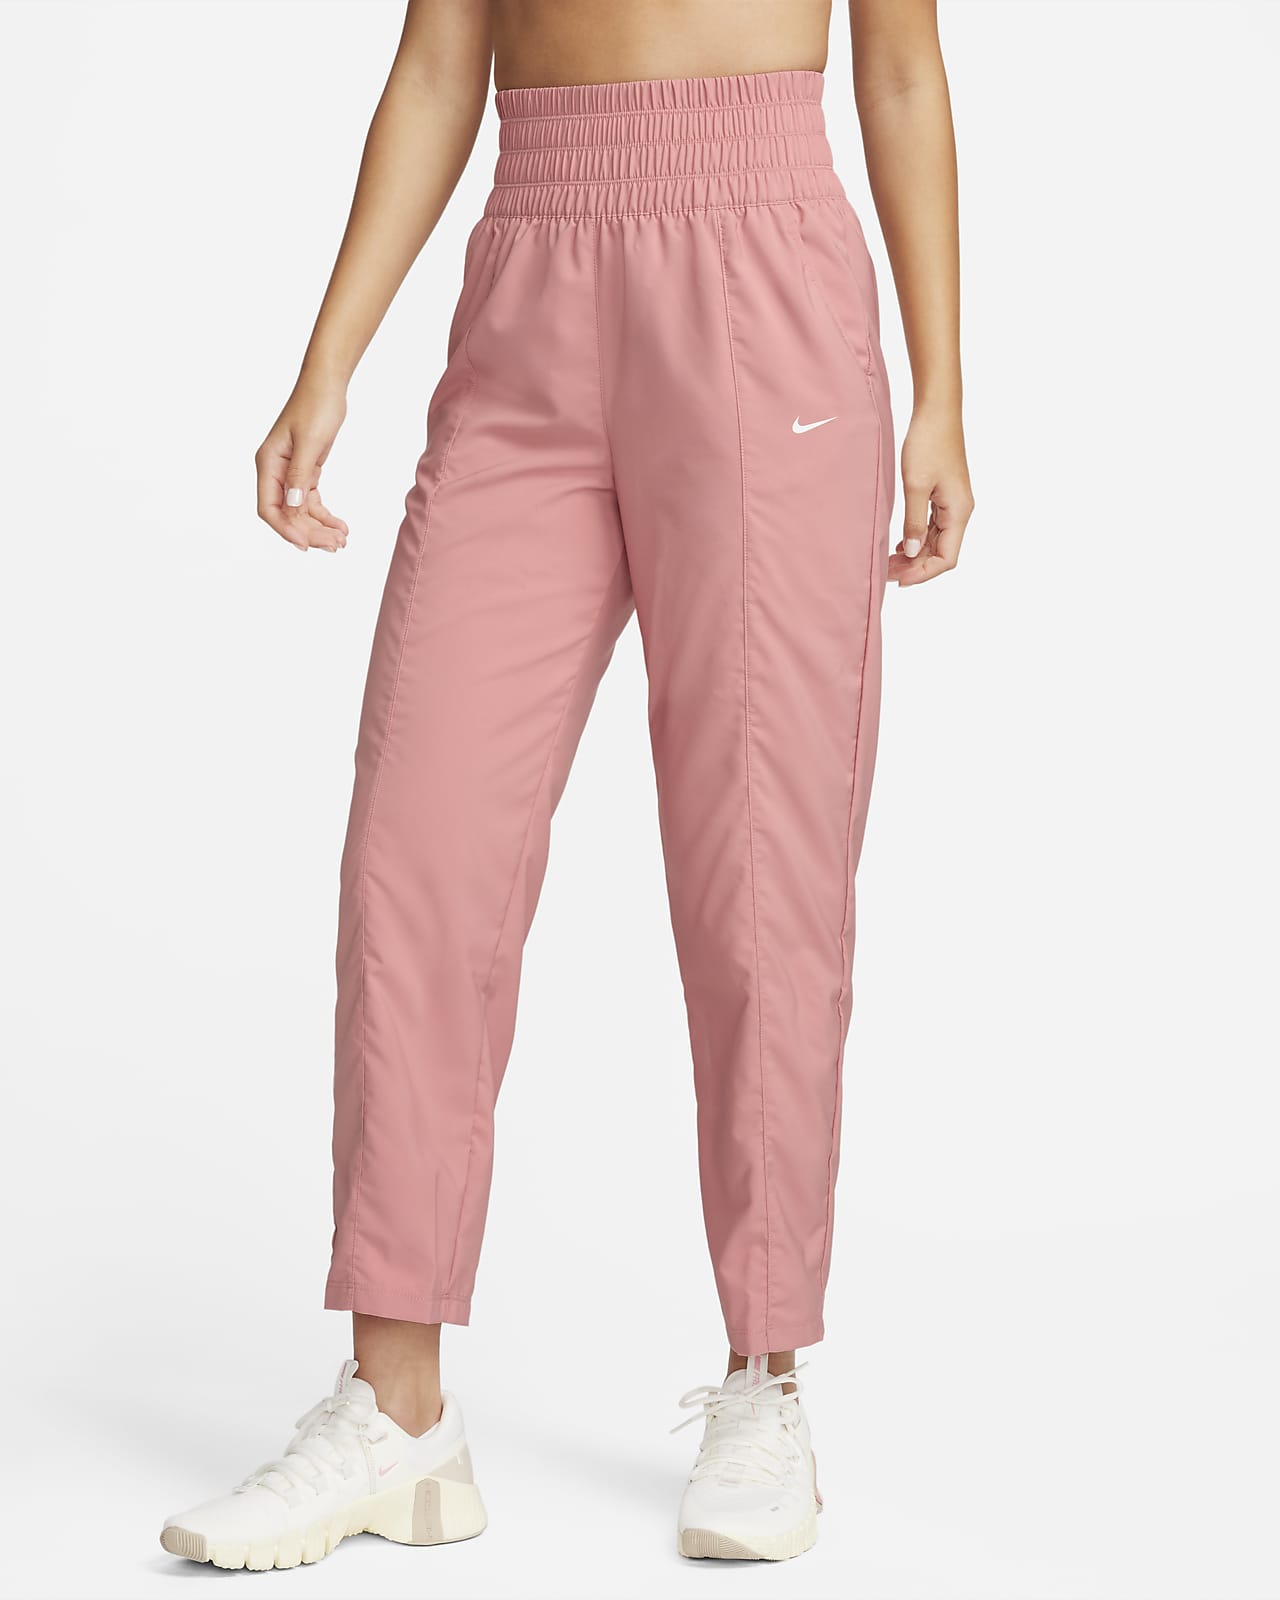 18 Flattering HighWaisted Trousers That Arent Paper Bag Waist Pants   HuffPost Life